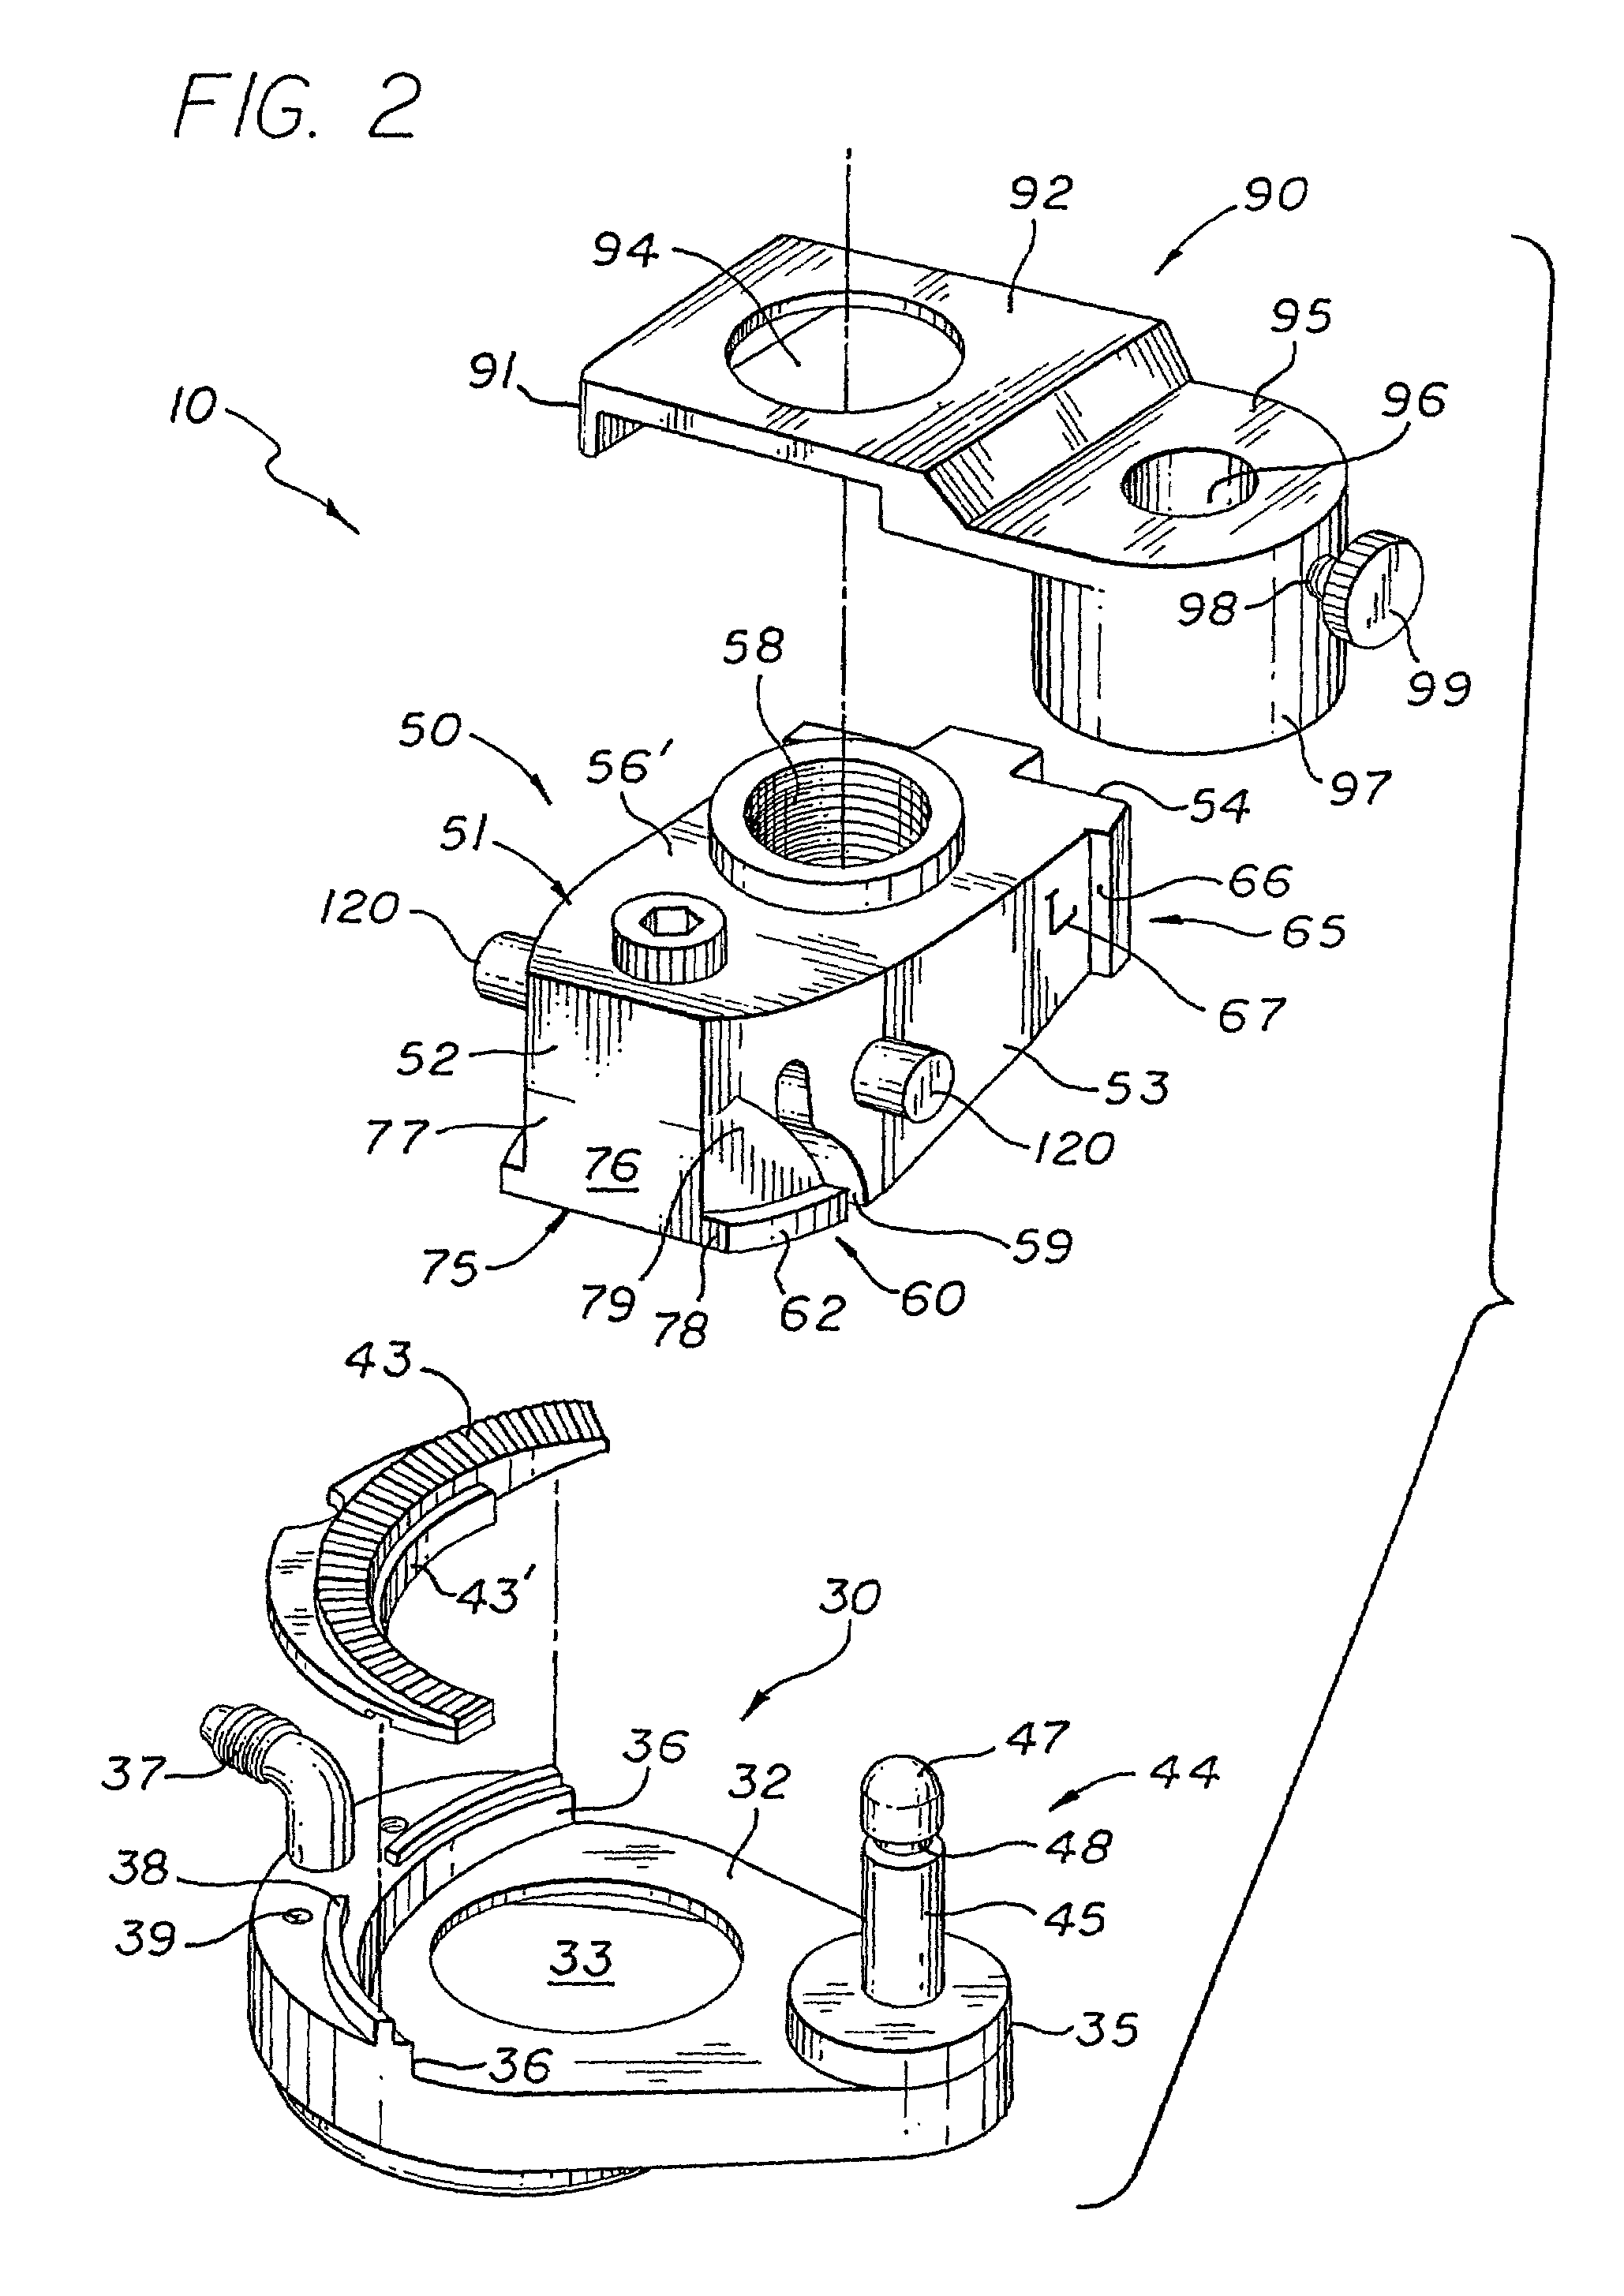 Automatic surgical device and control assembly for cutting a cornea